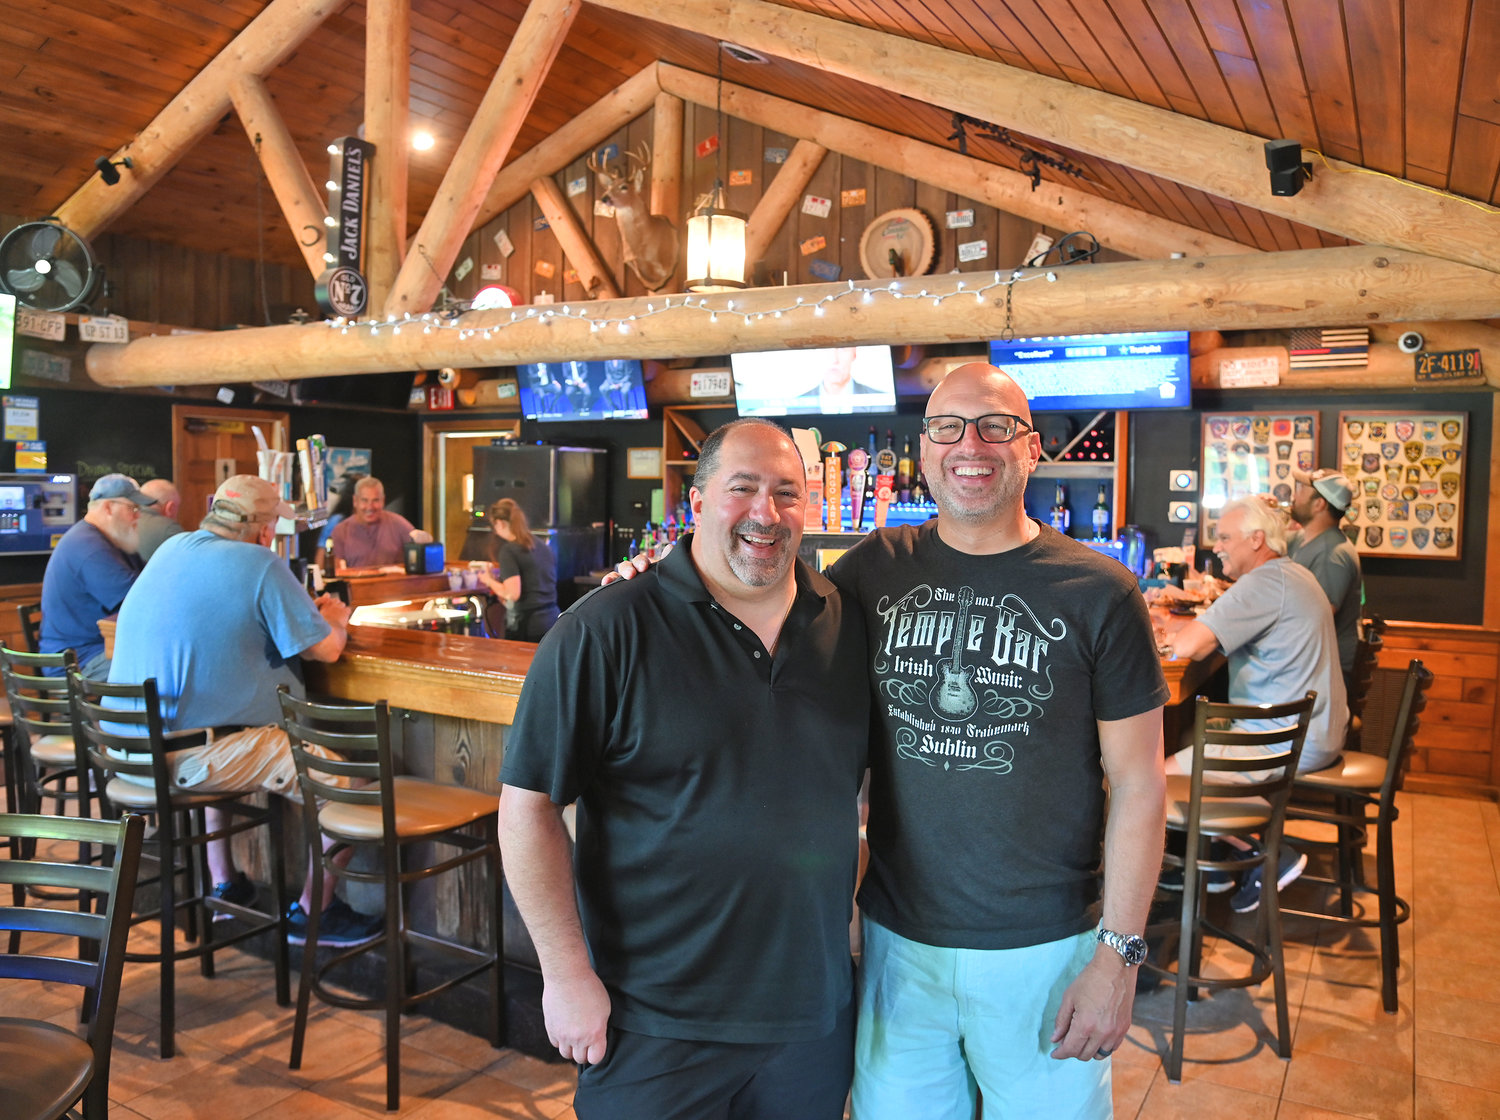 Two of the three owners of Knucklehead’s Brew House: Mike DeSantis, left, and Greg Raab. The one owner missing is Mike Collea.